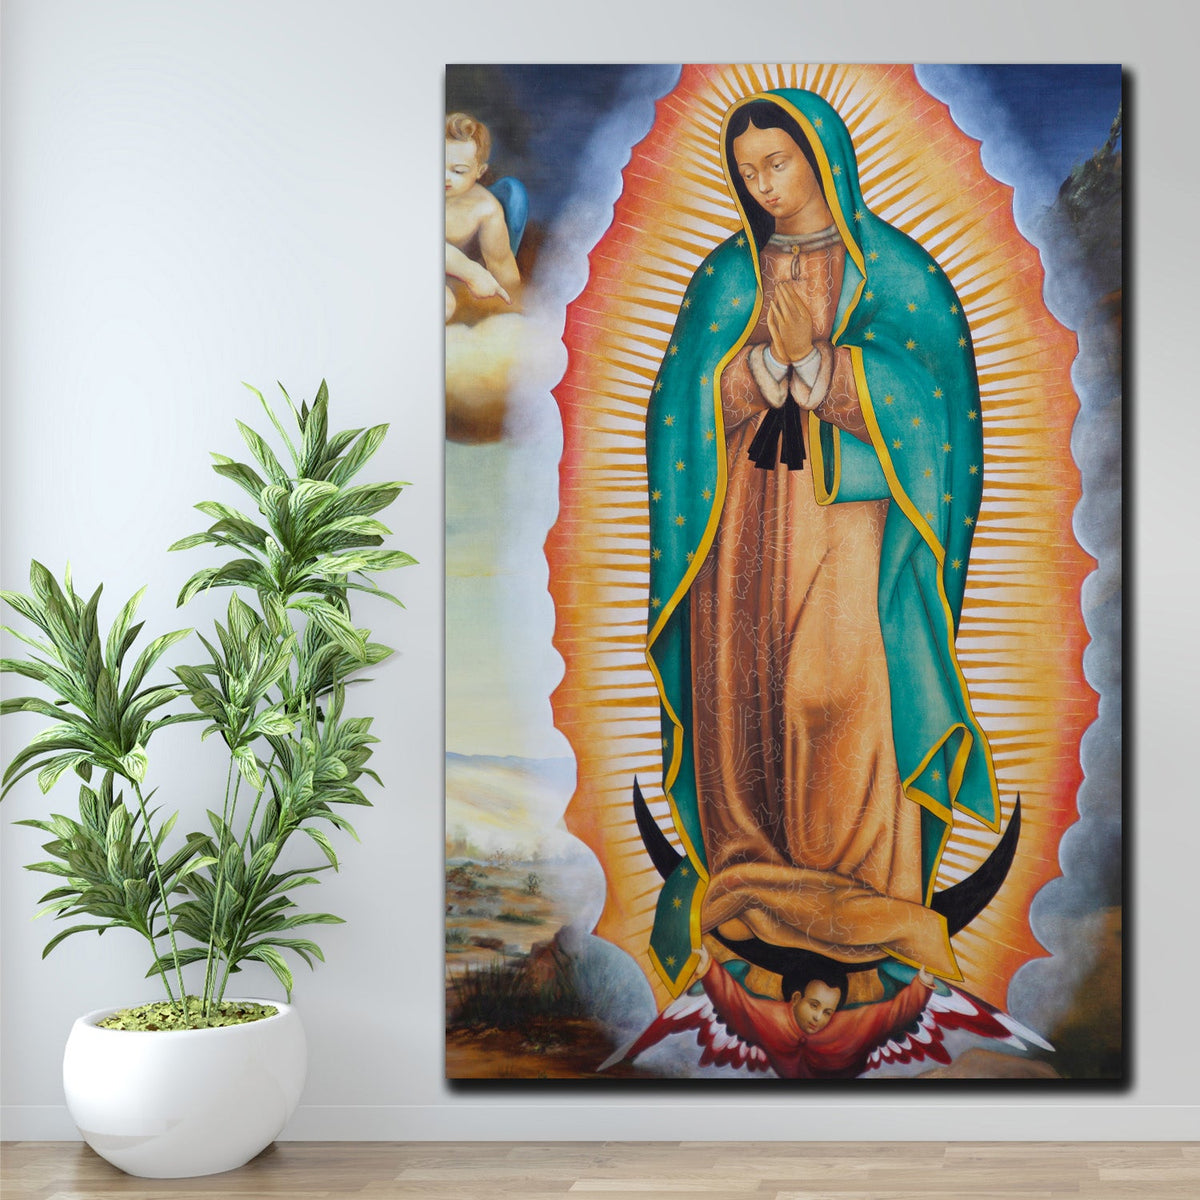 https://cdn.shopify.com/s/files/1/0387/9986/8044/products/VirginMaryofGuadalupeCanvasArtprintStretched-1.jpg